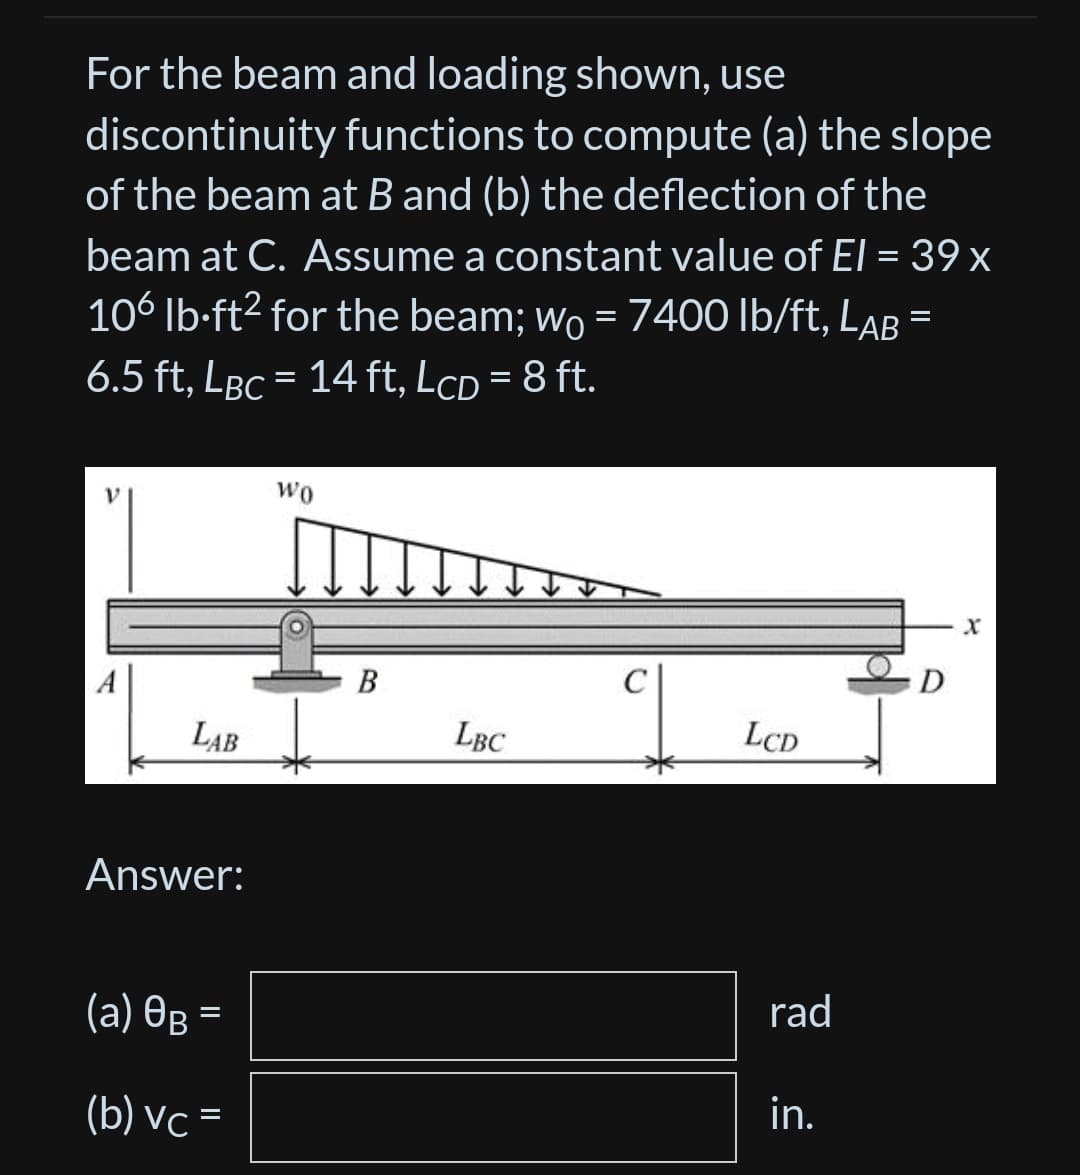 For the beam and loading shown, use
discontinuity functions to compute (a) the slope
of the beam at B and (b) the deflection of the
beam at C. Assume a constant value of El = 39 x
106 lb-ft² for the beam; wo = 7400 lb/ft, Lab =
6.5 ft, LBC = 14 ft, LcD = 8 ft.
LAB
Answer:
(a) 0B =
(b) vc =
WO
B
LBC
LCD
rad
in.
D
X